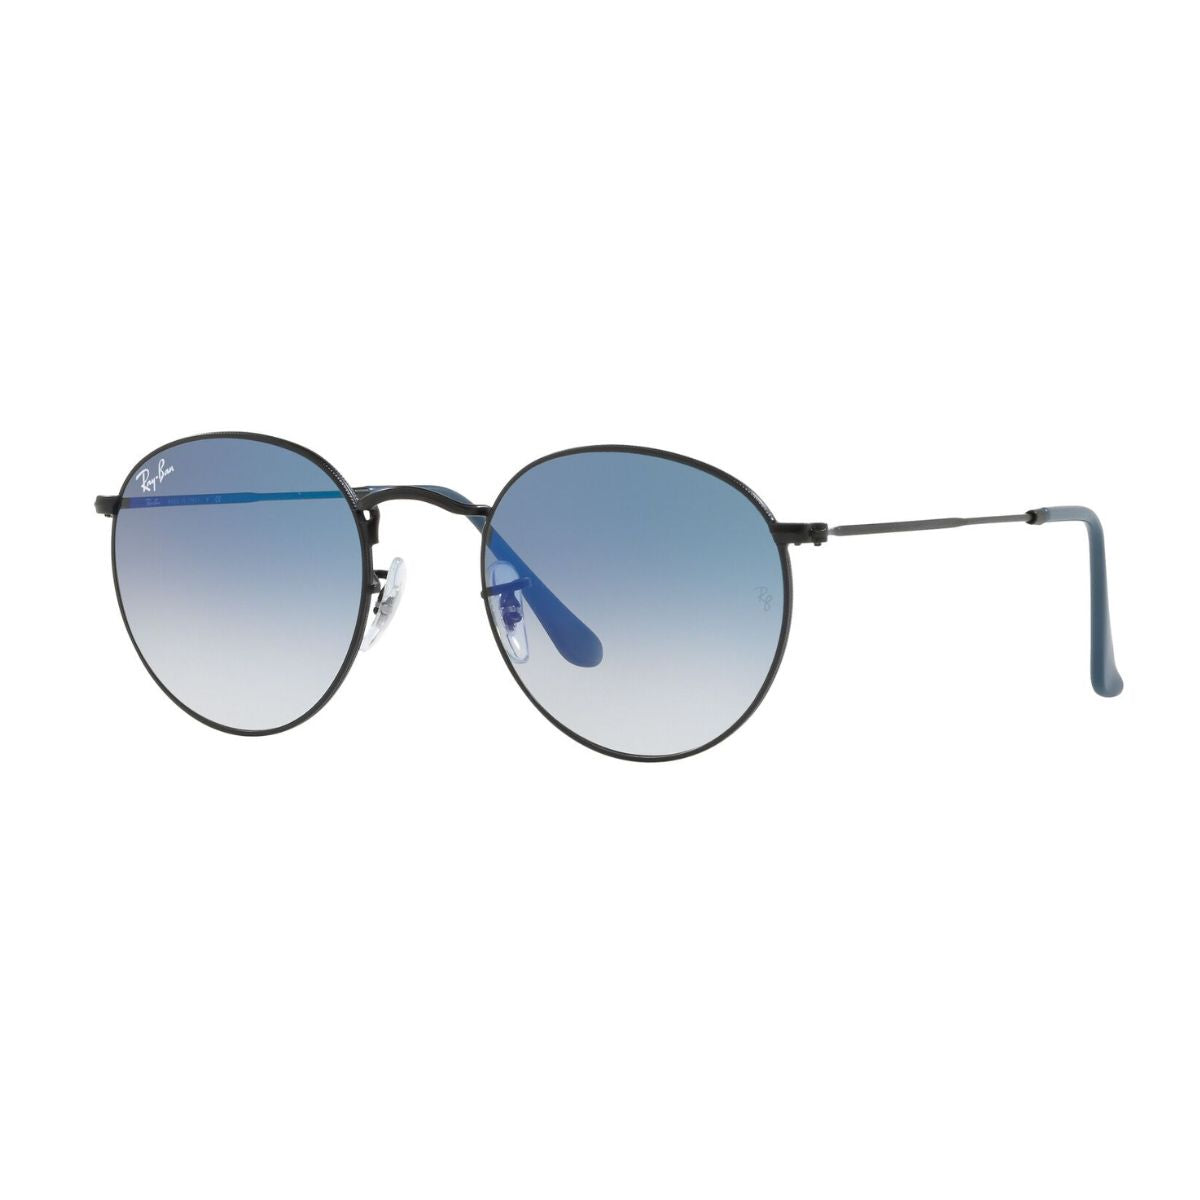 "Rayban 3447 006/3F UV protection Sunglass for Men At Optorium"